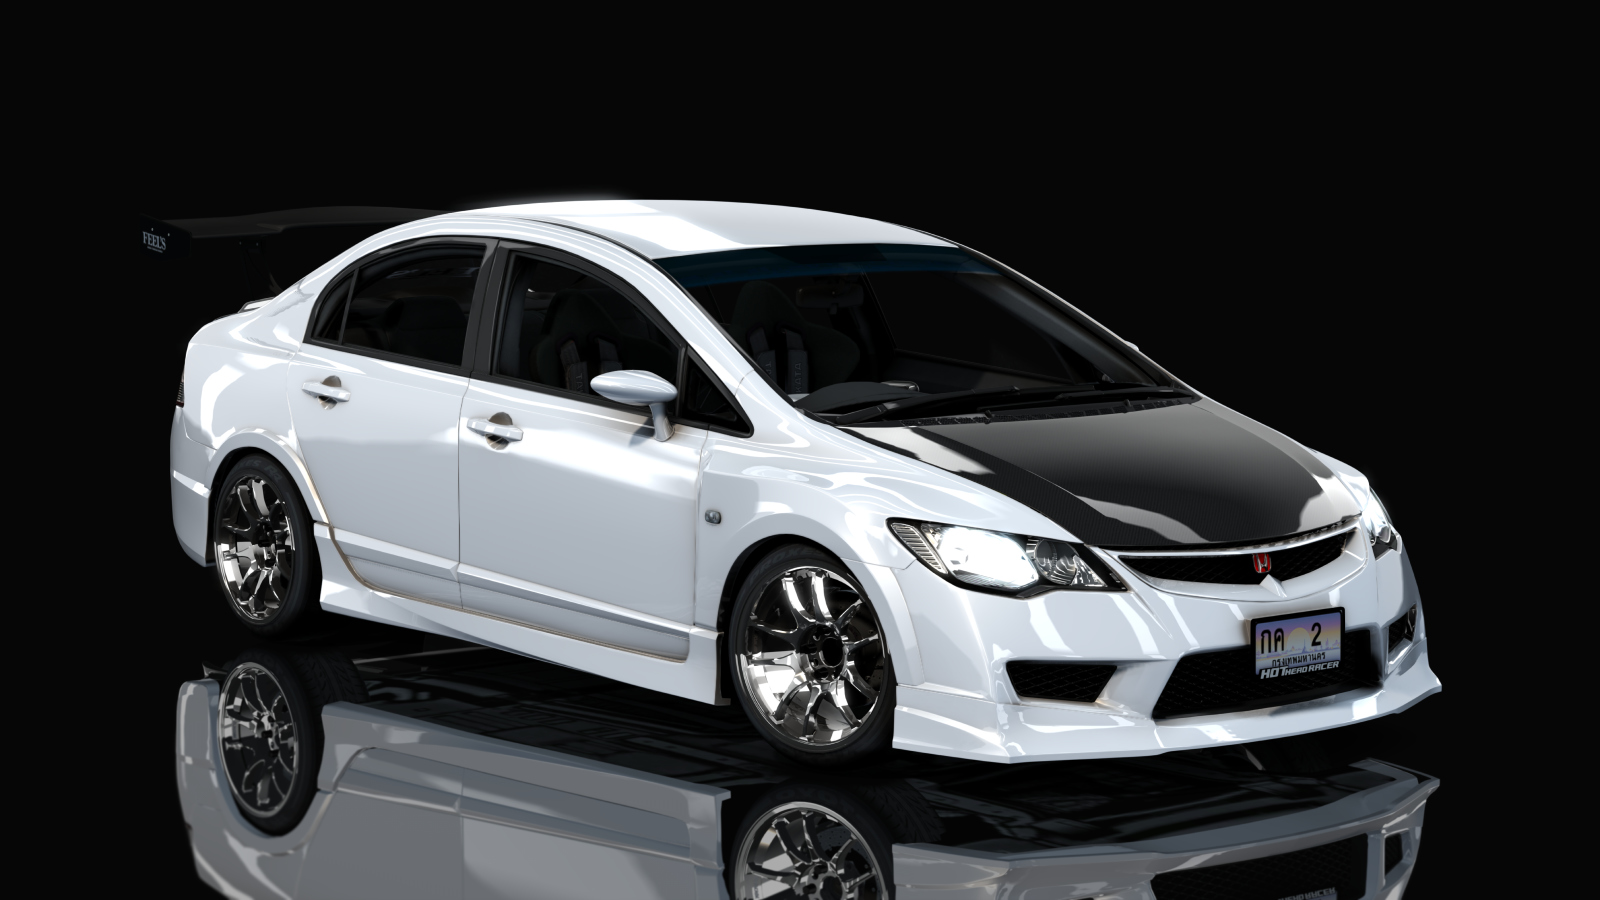 HOTHEAD21 Honda FD2 Type R Feel's Full System by 76 Garage Preview Image